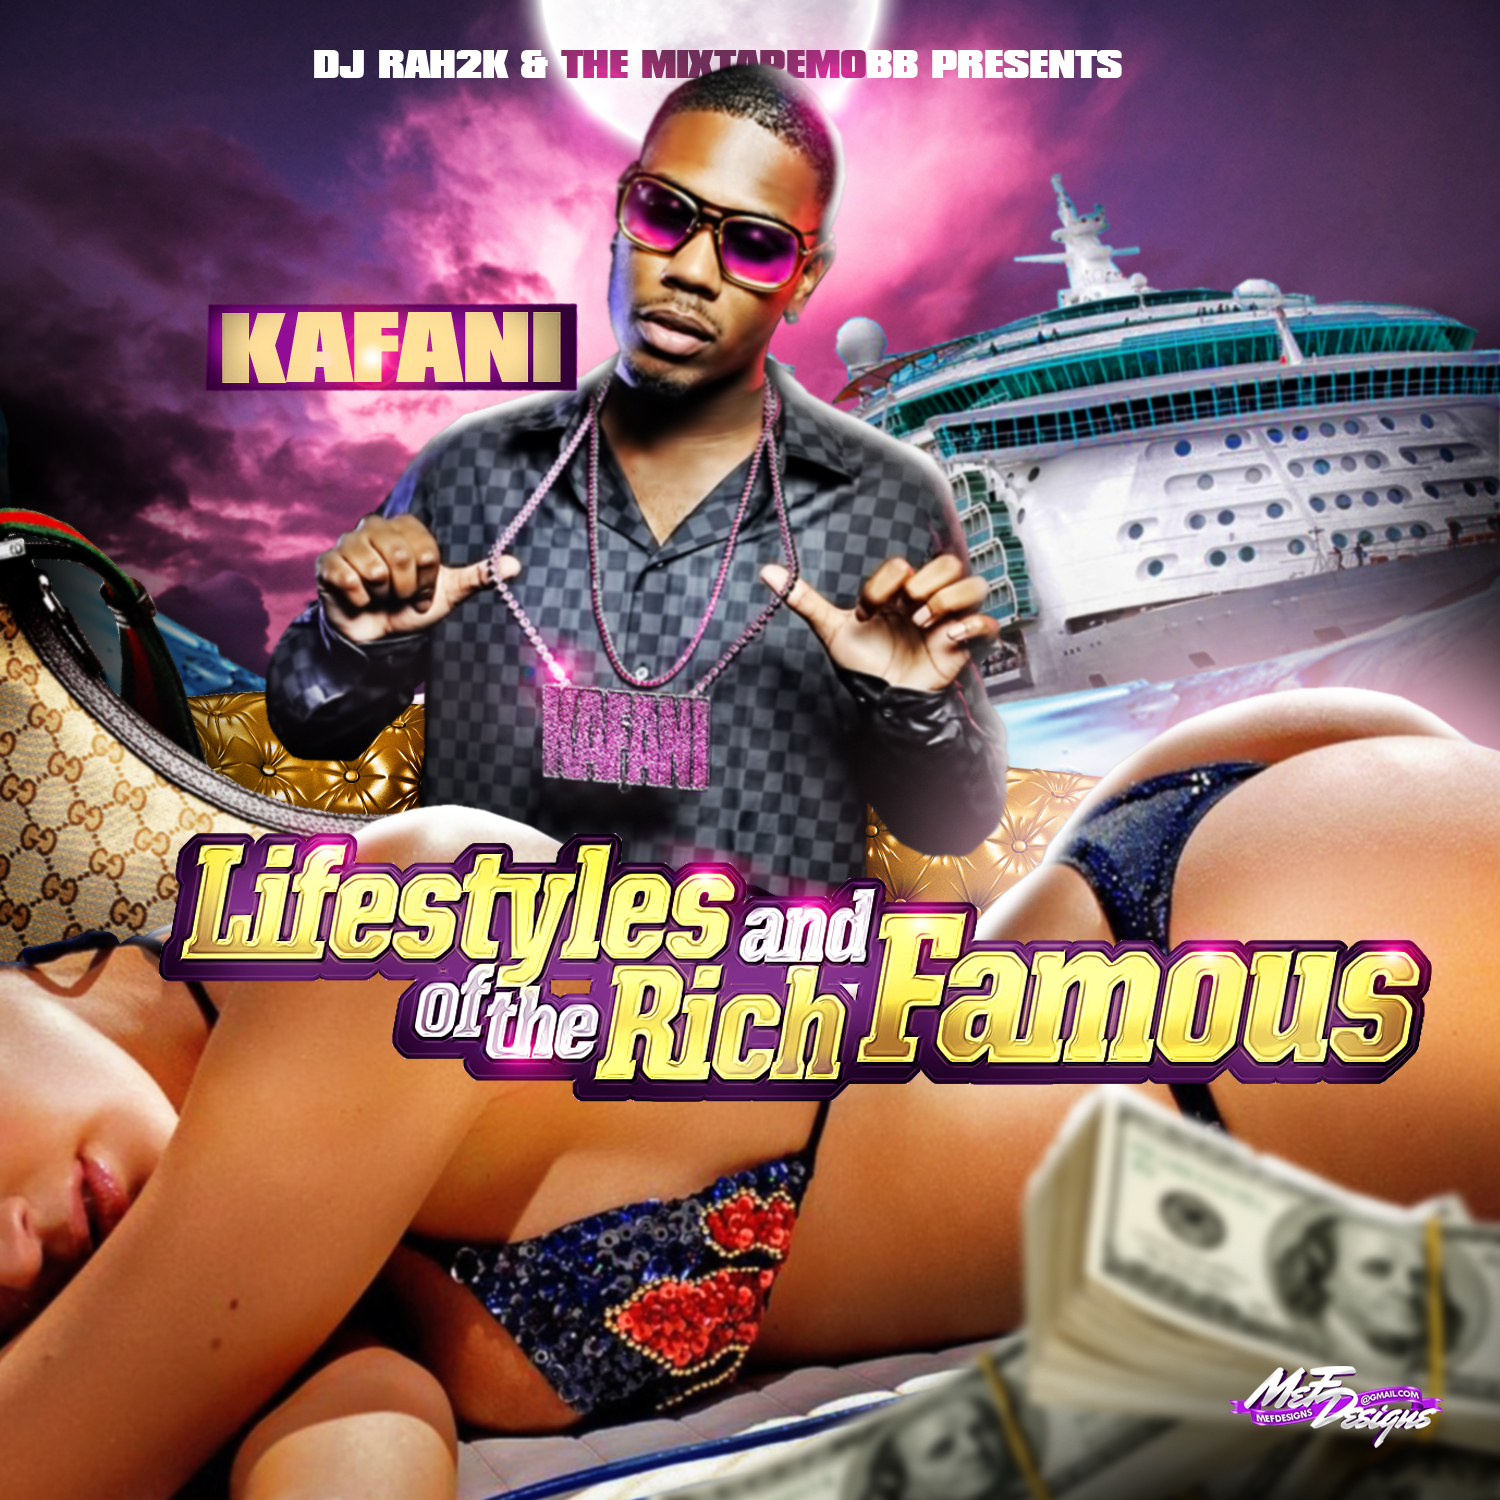 New Exclusive Music: Fresher Then You by Kafani ft Mistah F.A.B & Samm 